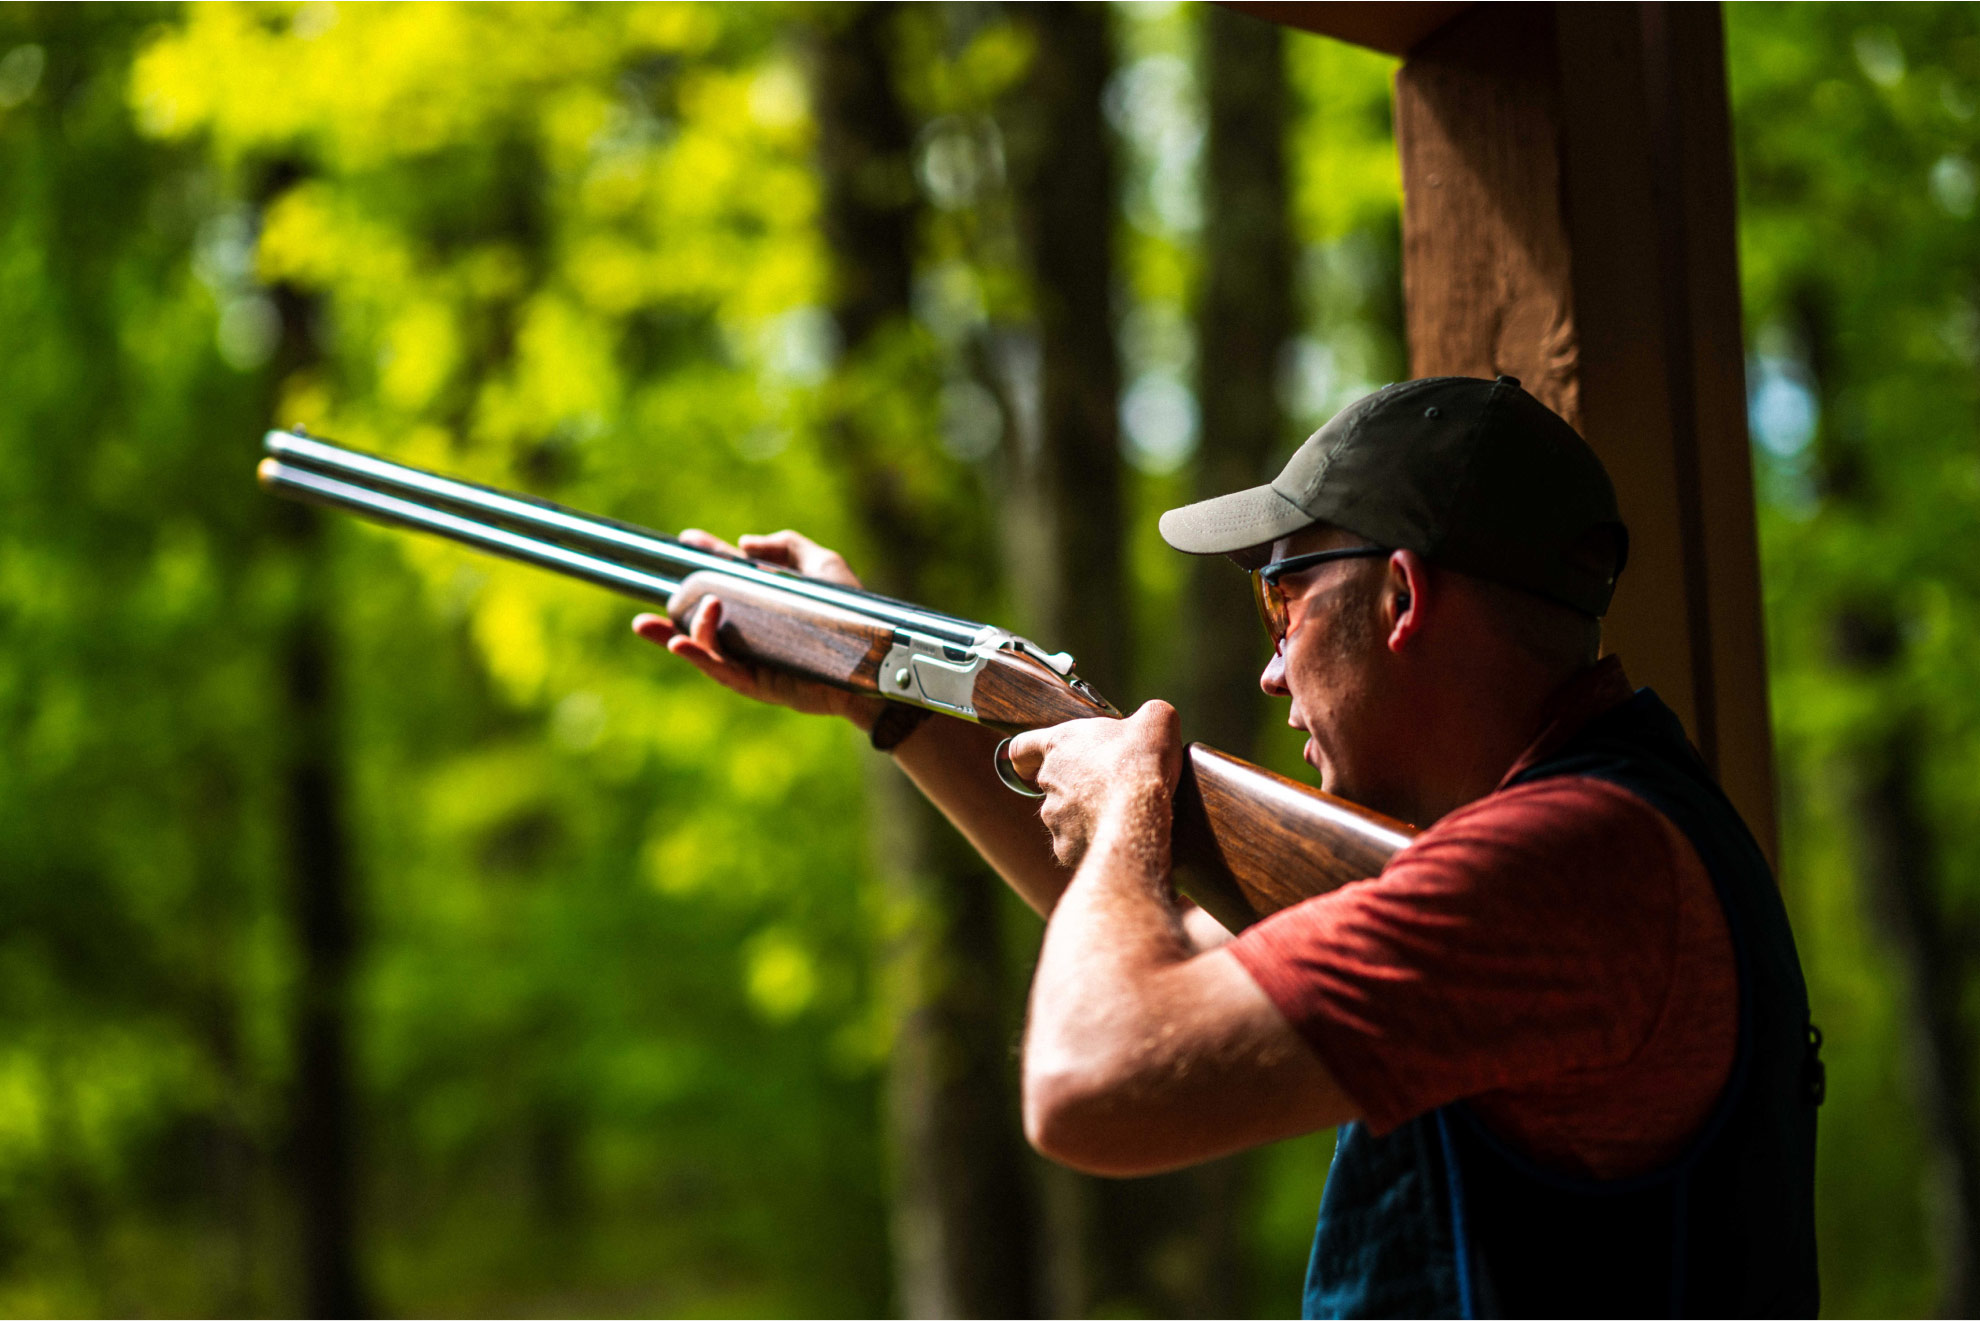 Visit Nemacolin Sporting Clays gathering page